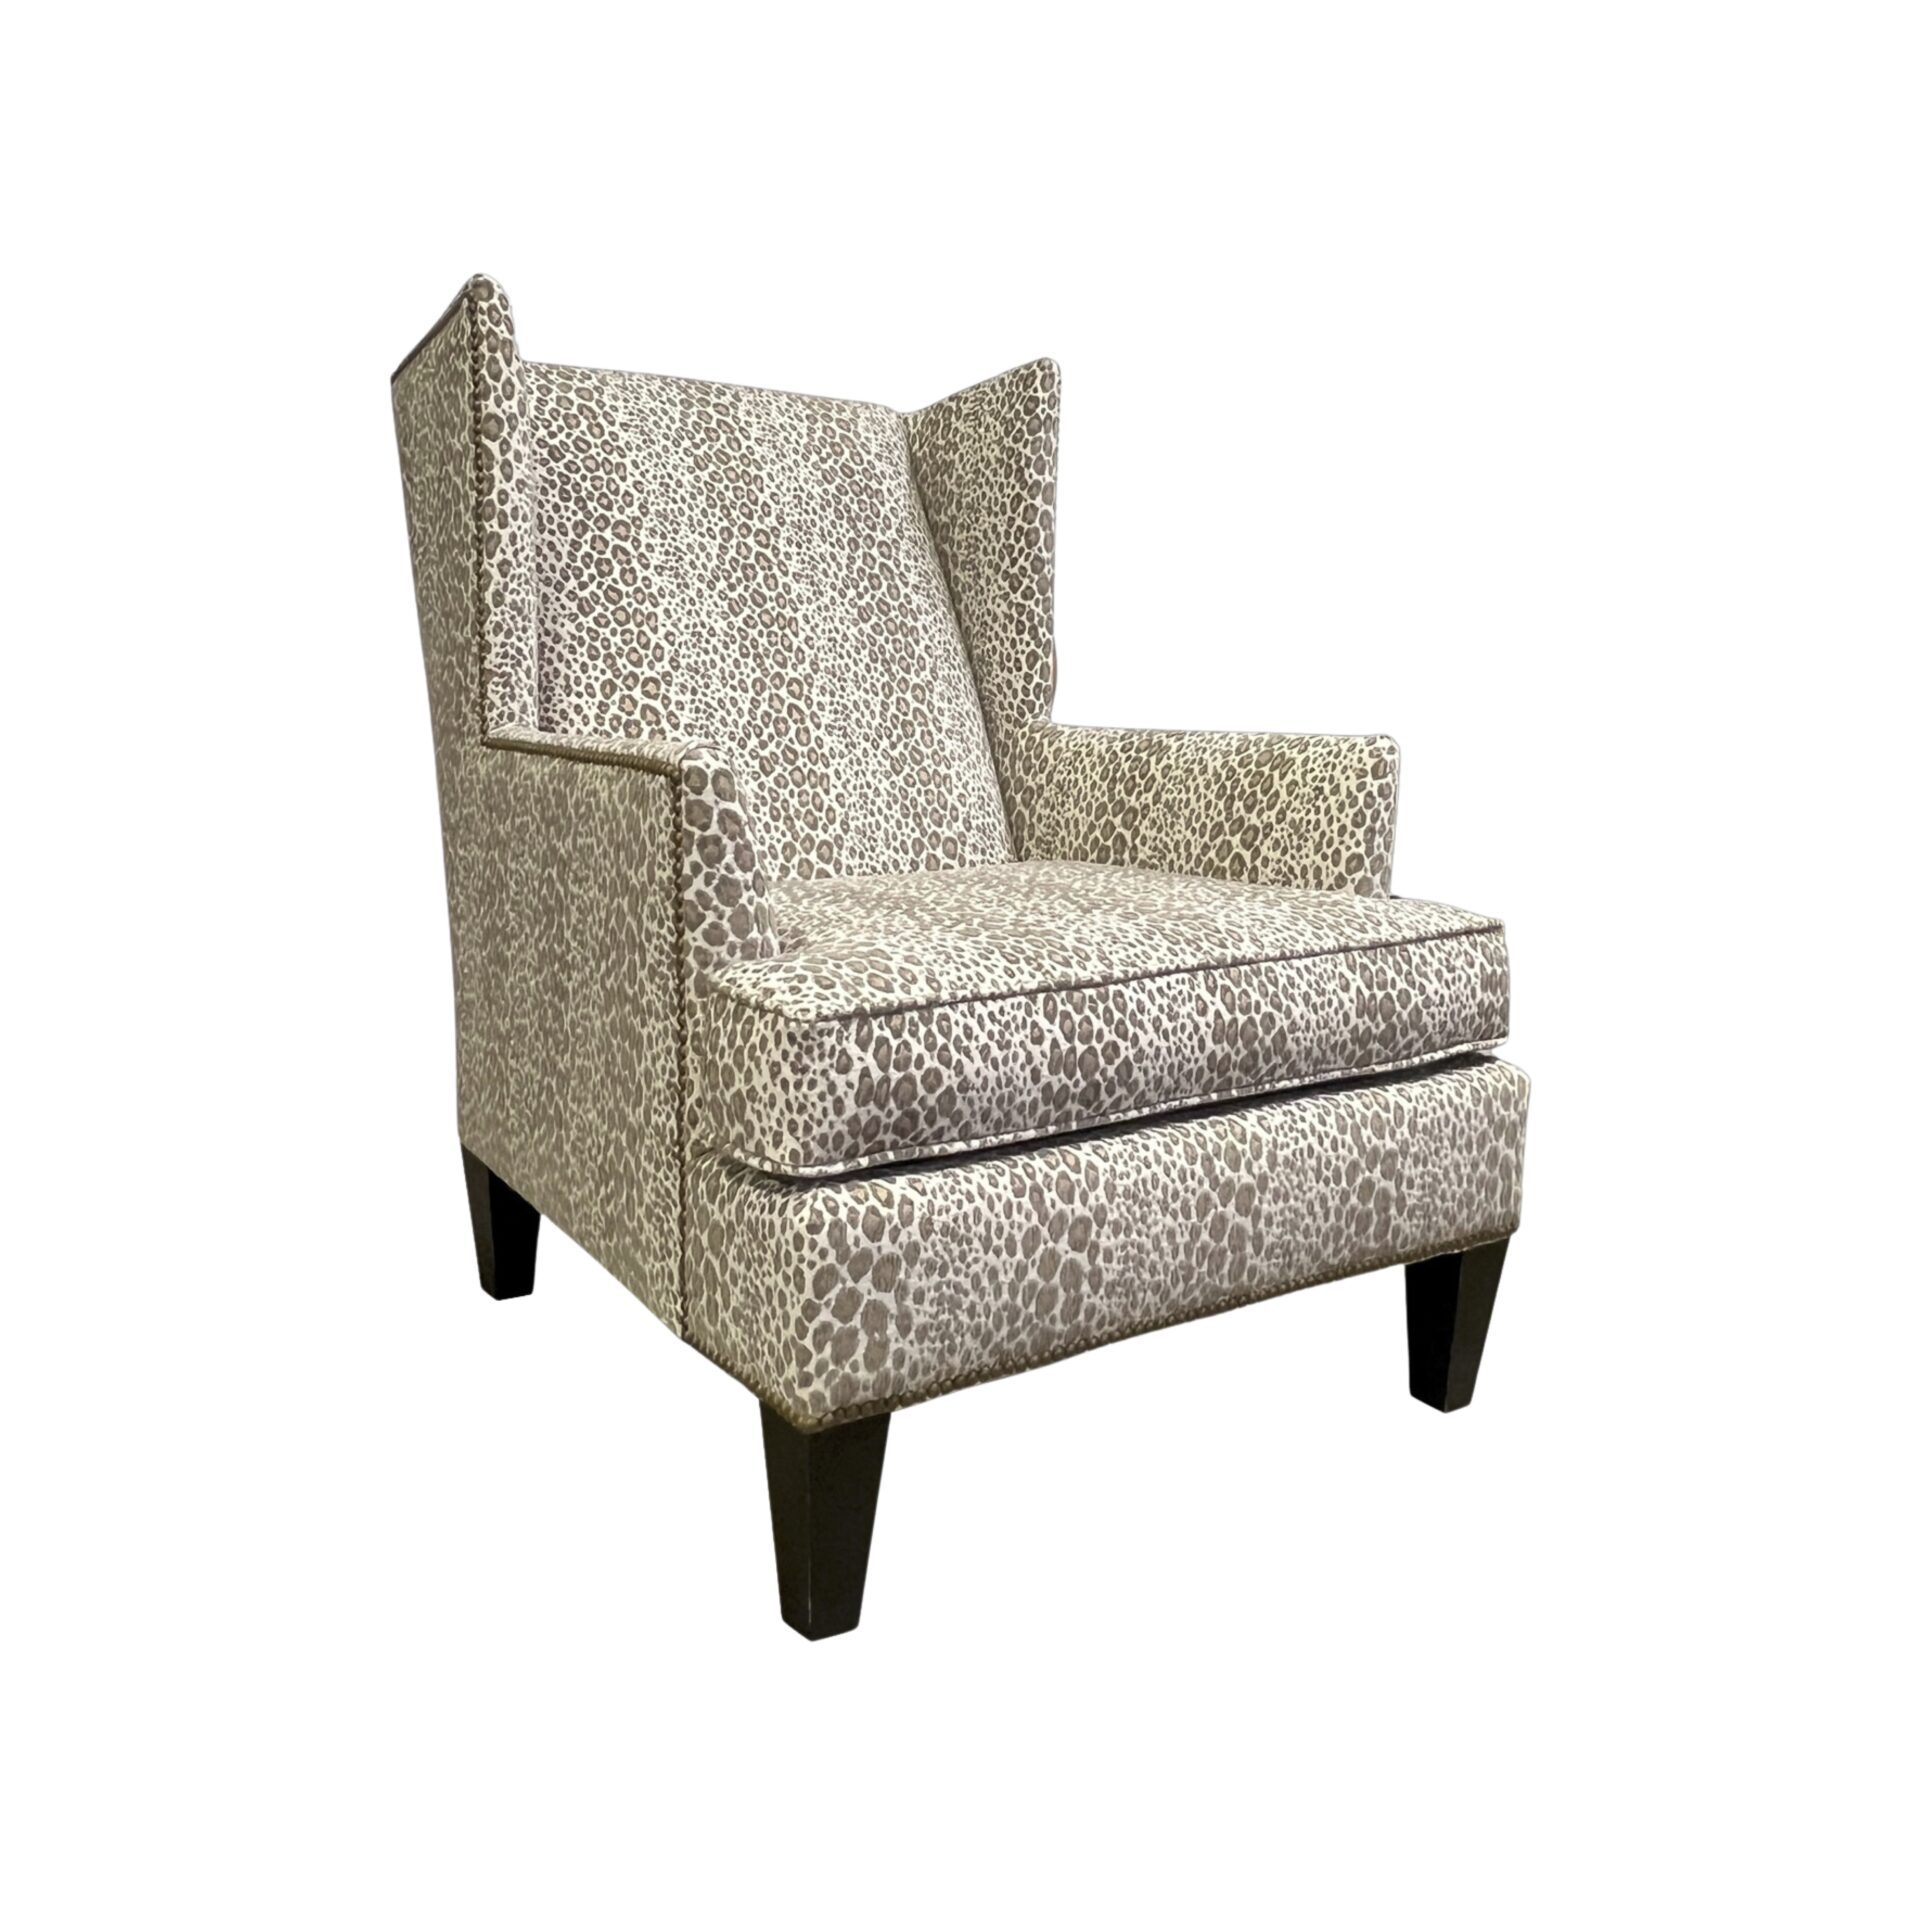 CAMBRIDGE-upholstered-chair-luxury-furniture-blend-home-furnishings